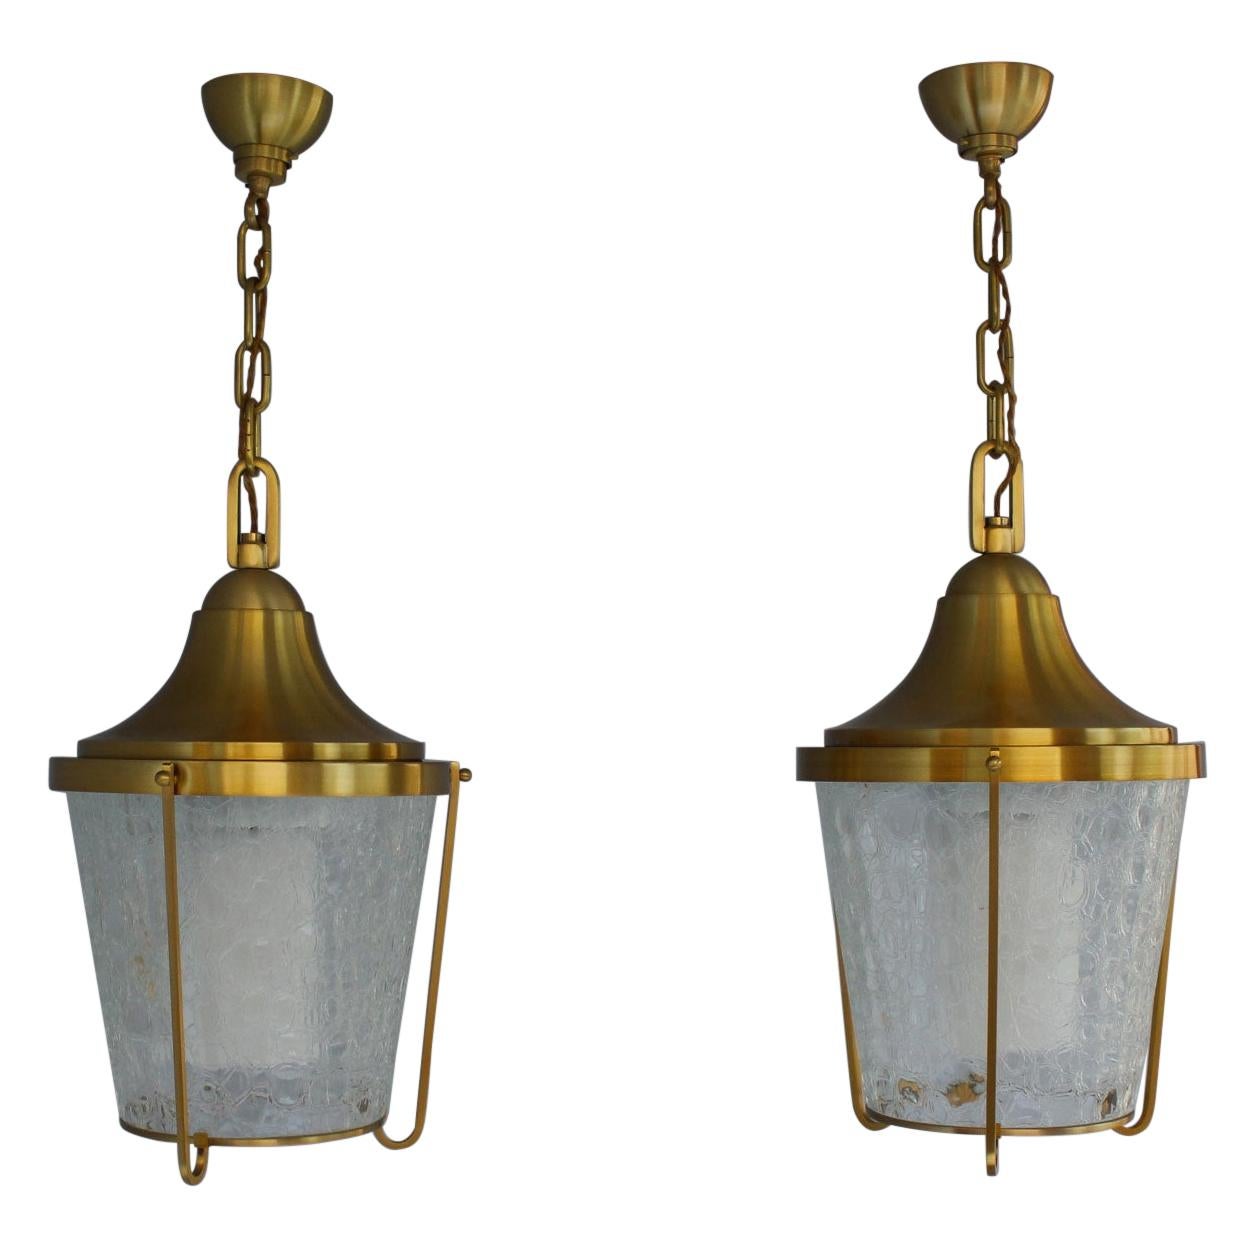 Pair of Hanging Bronze and "craquelé" Glass Lanterns by Jean Perzel